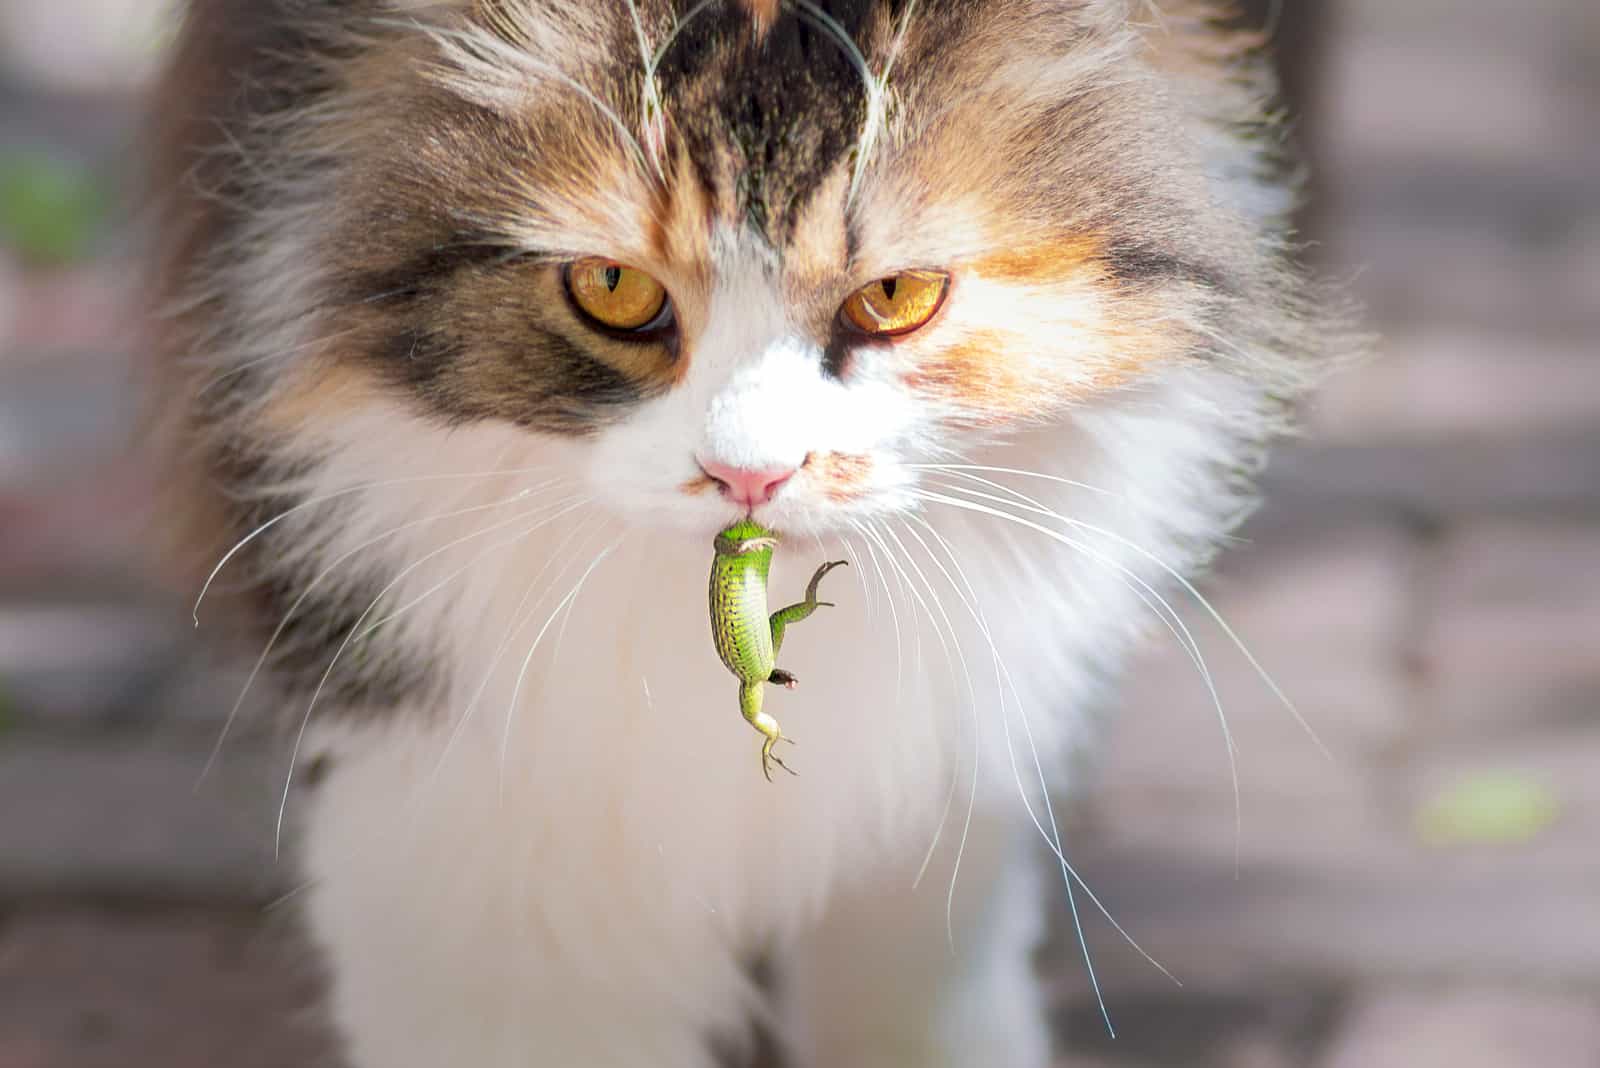 Cat caught a lizard and holding it in mouth